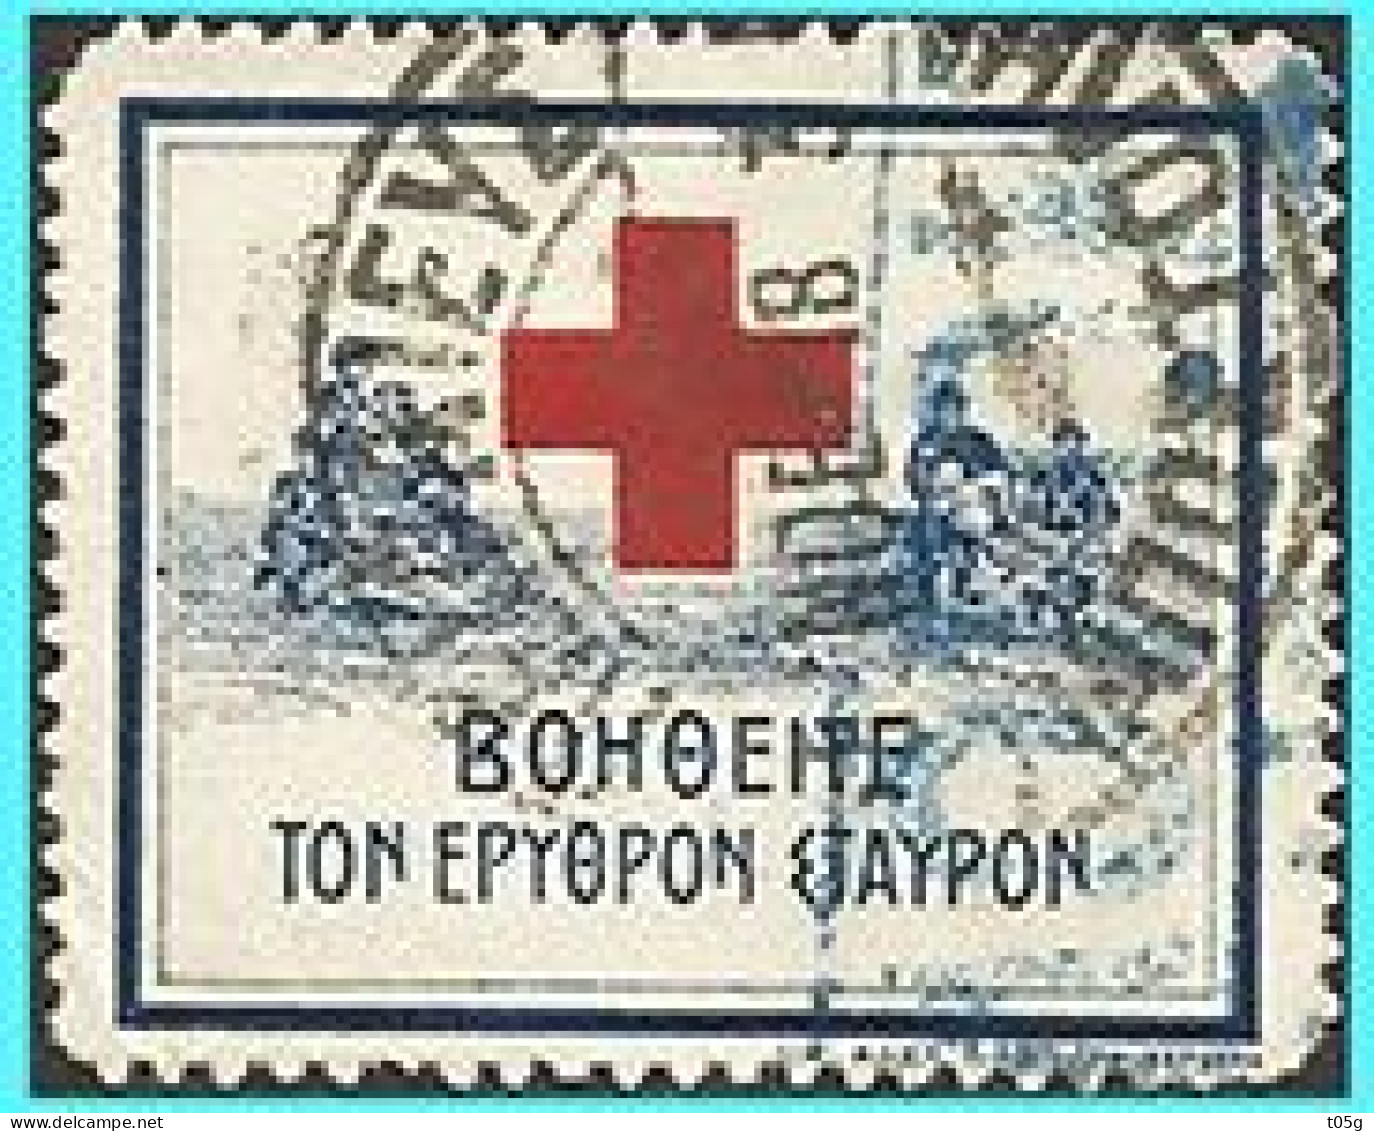 GREECE- GRECE - HELLAS CHARITY STAMPS 1915 : "Red Cross"  Set Used - Gebraucht